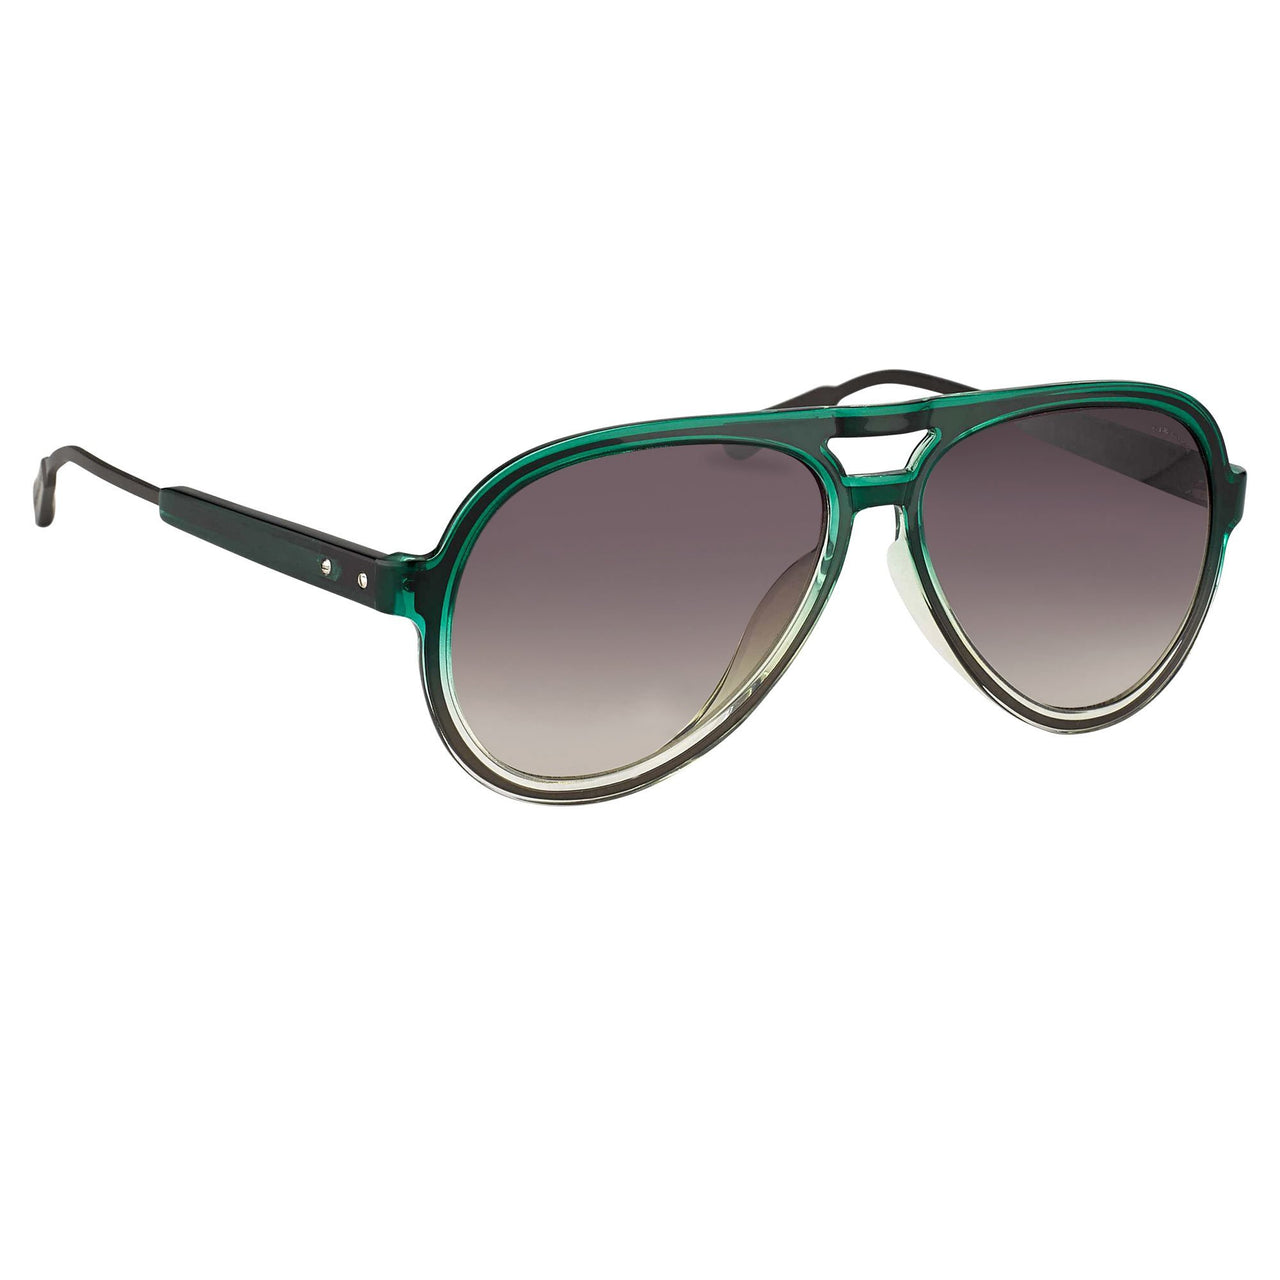 Kris Van Assche Unisex Sunglasses Clear Green and Brown Grey Graduated Lenses Category 2 - KVA78C3SUN - Watches & Crystals